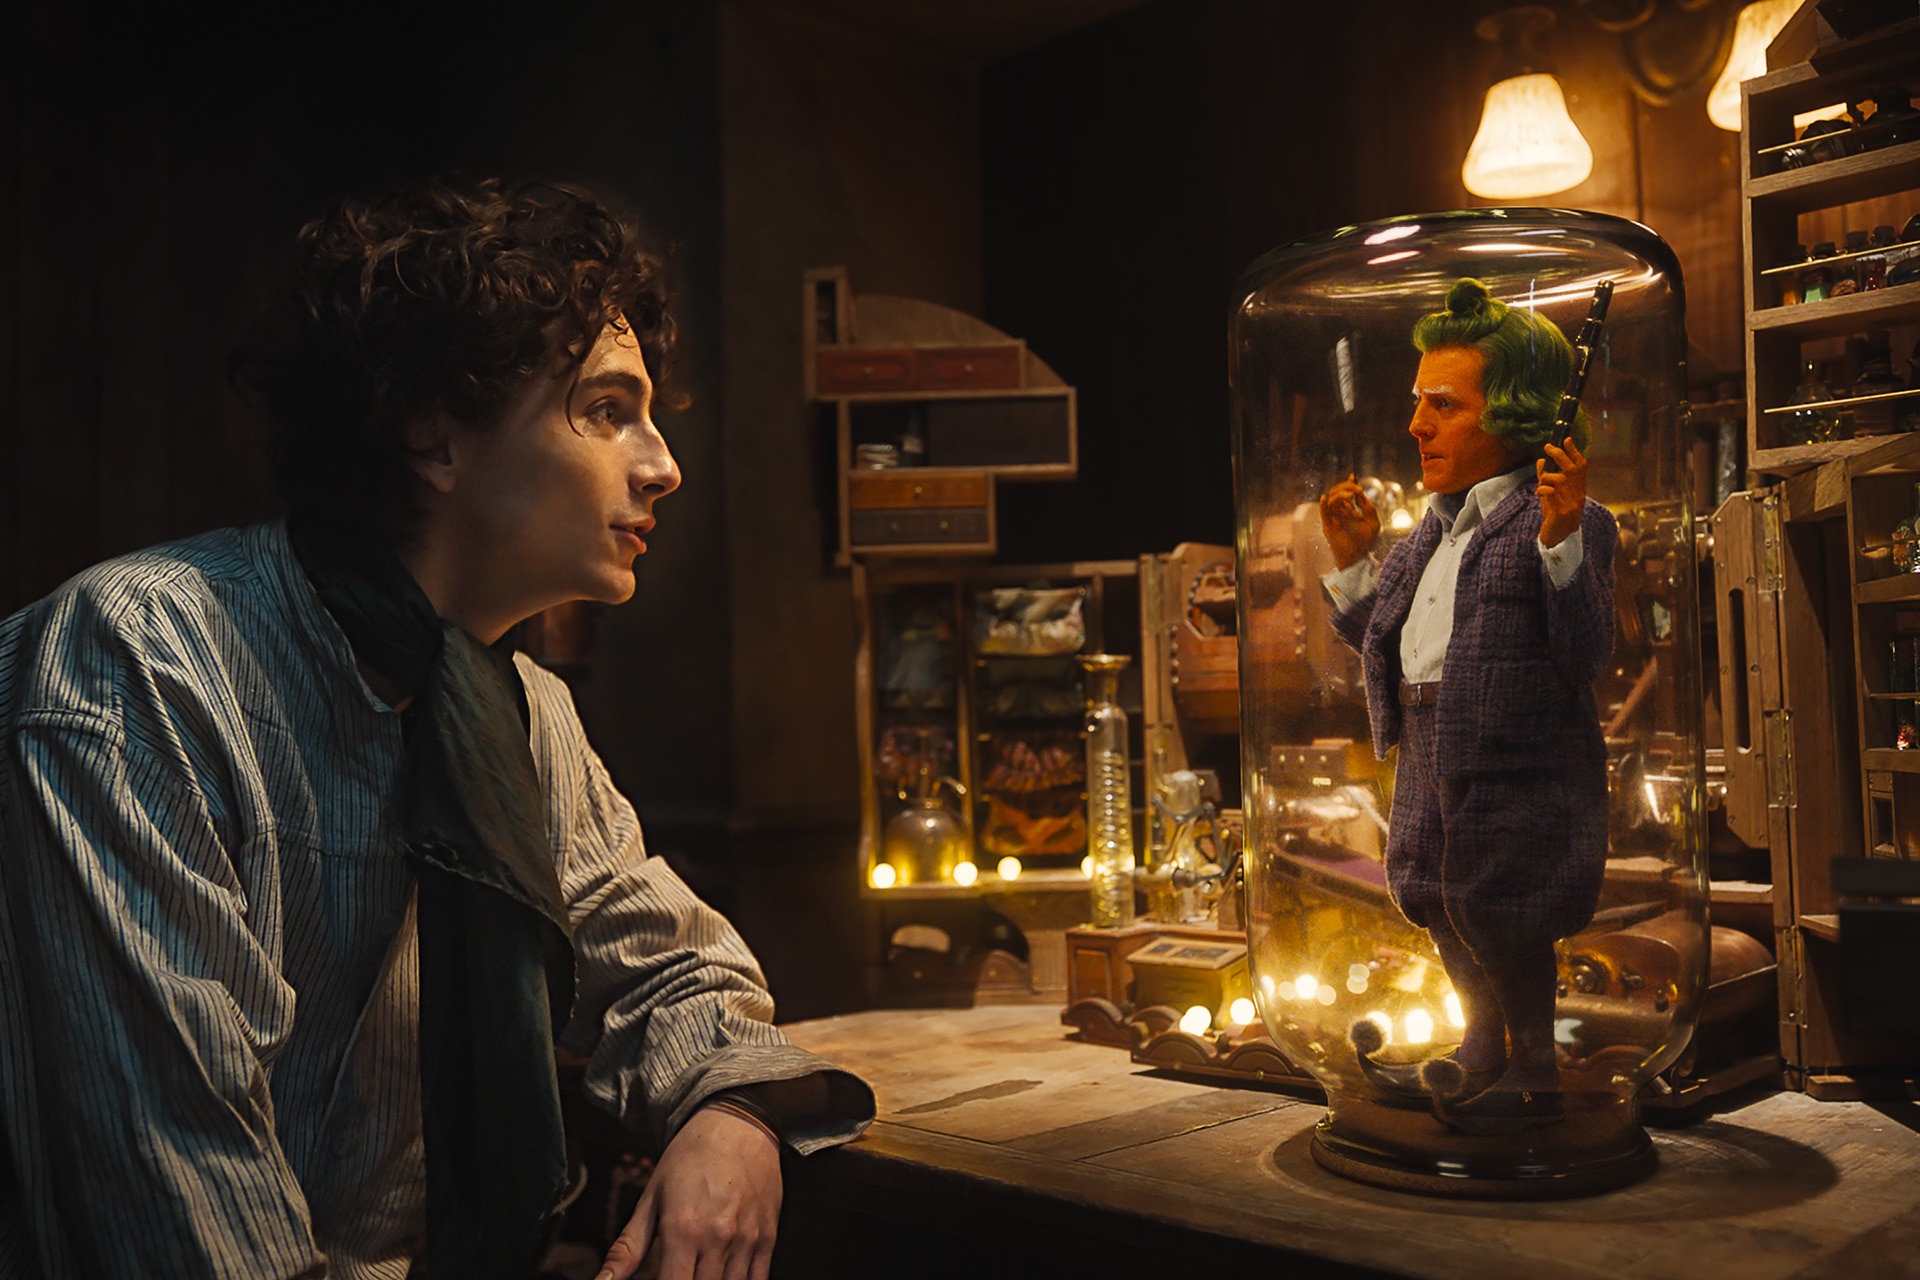 Willy Wonka sits at a desk talking to Oompa Loompa. Oompa Loompa, a small man with orange skin and green hair, stands inside a glass jar on the desktop.